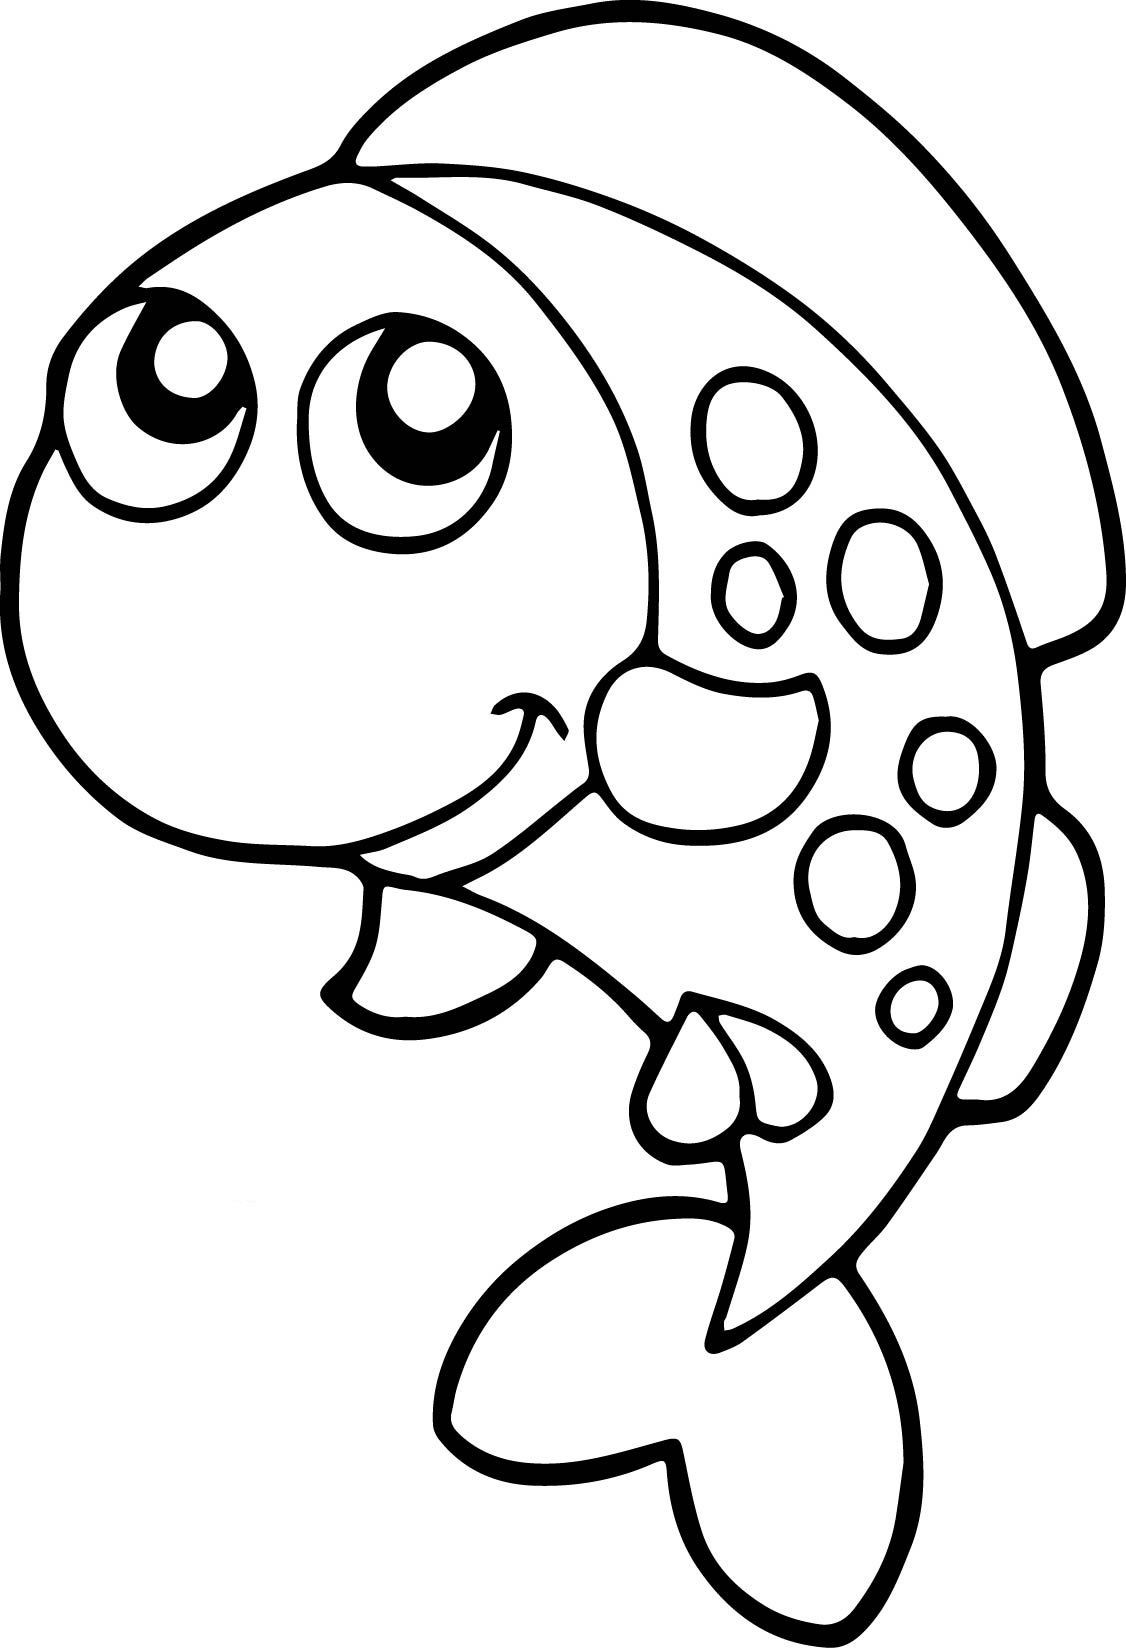 Fish Coloring Pages For Kids
 Fish Coloring Pages For Kids Preschool and Kindergarten